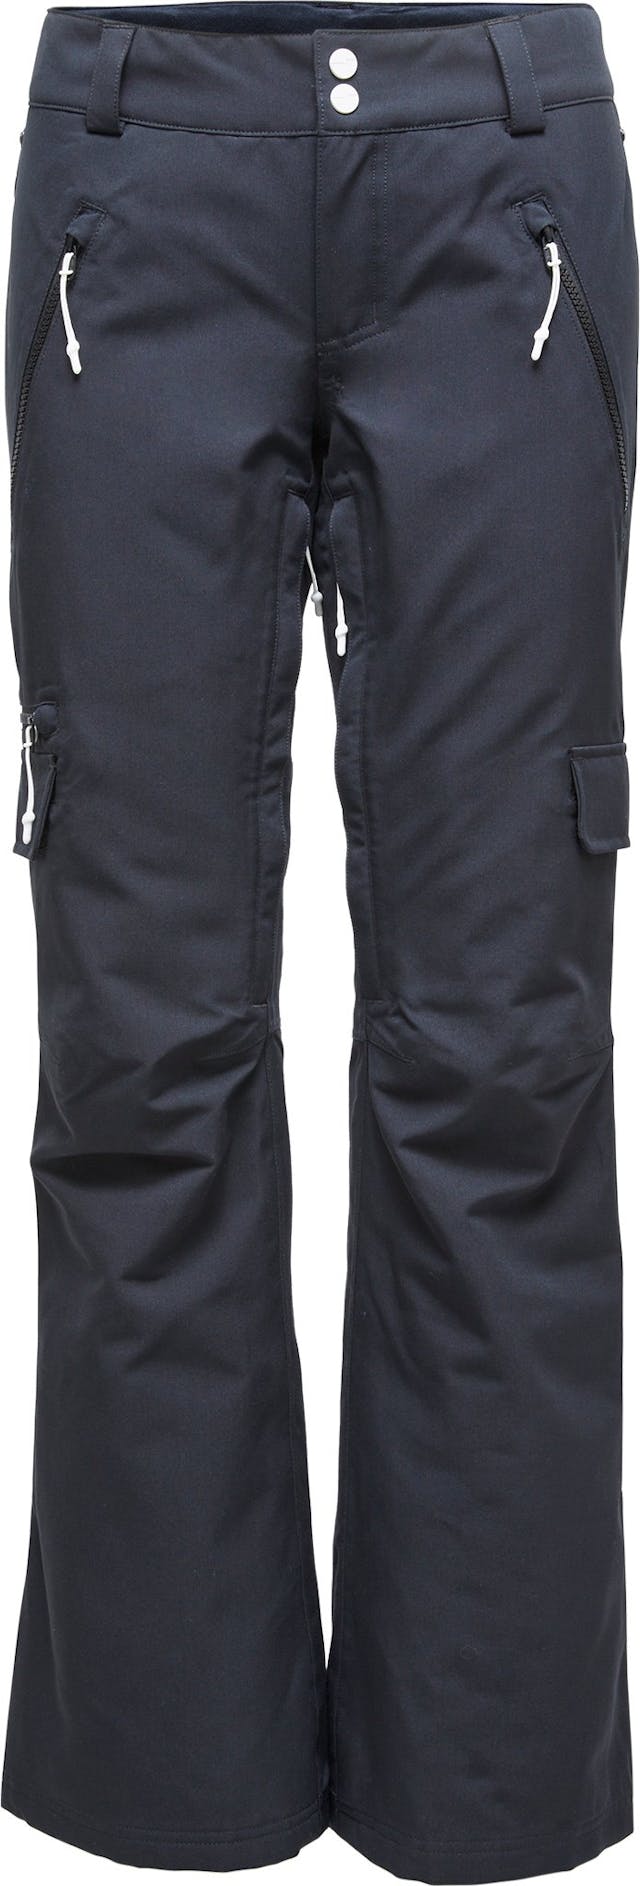 Product image for Mula 2 Layer Insulated Pant - Women's